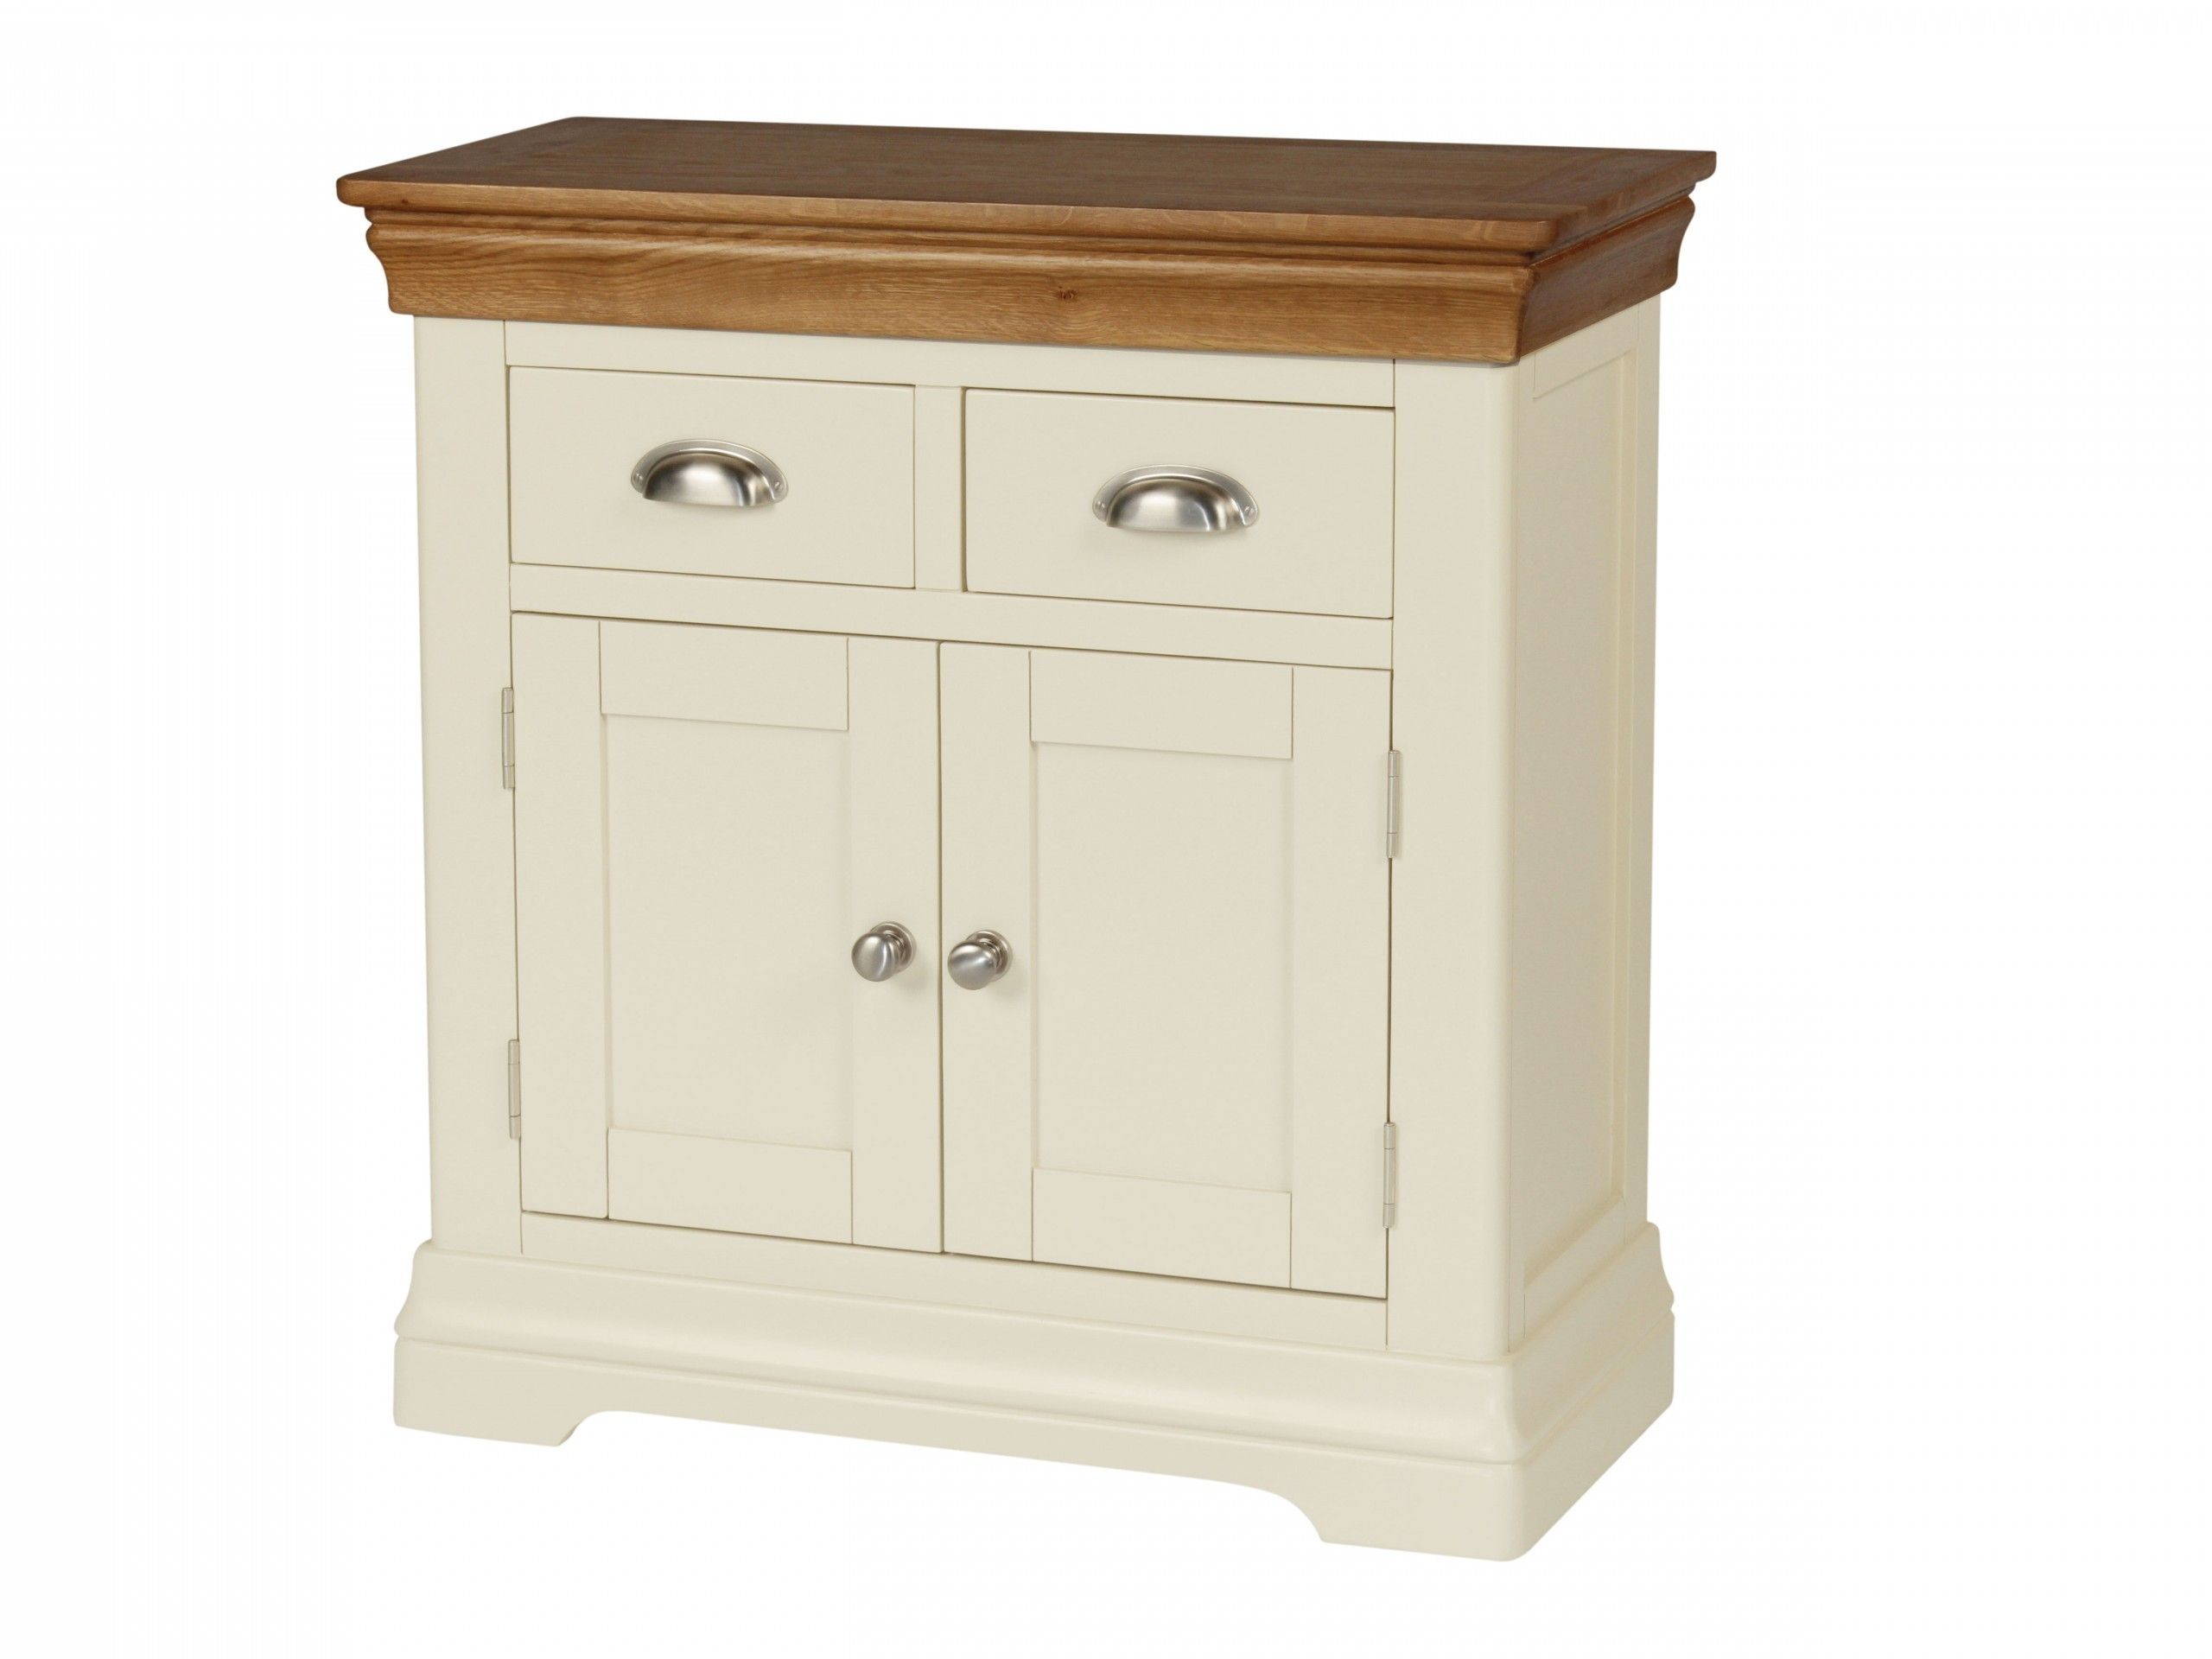 Country Oak Farmhouse 80cm Cream Painted Sideboard | Oak Sideboards Inside Corrugated White Wash Sideboards (View 10 of 30)